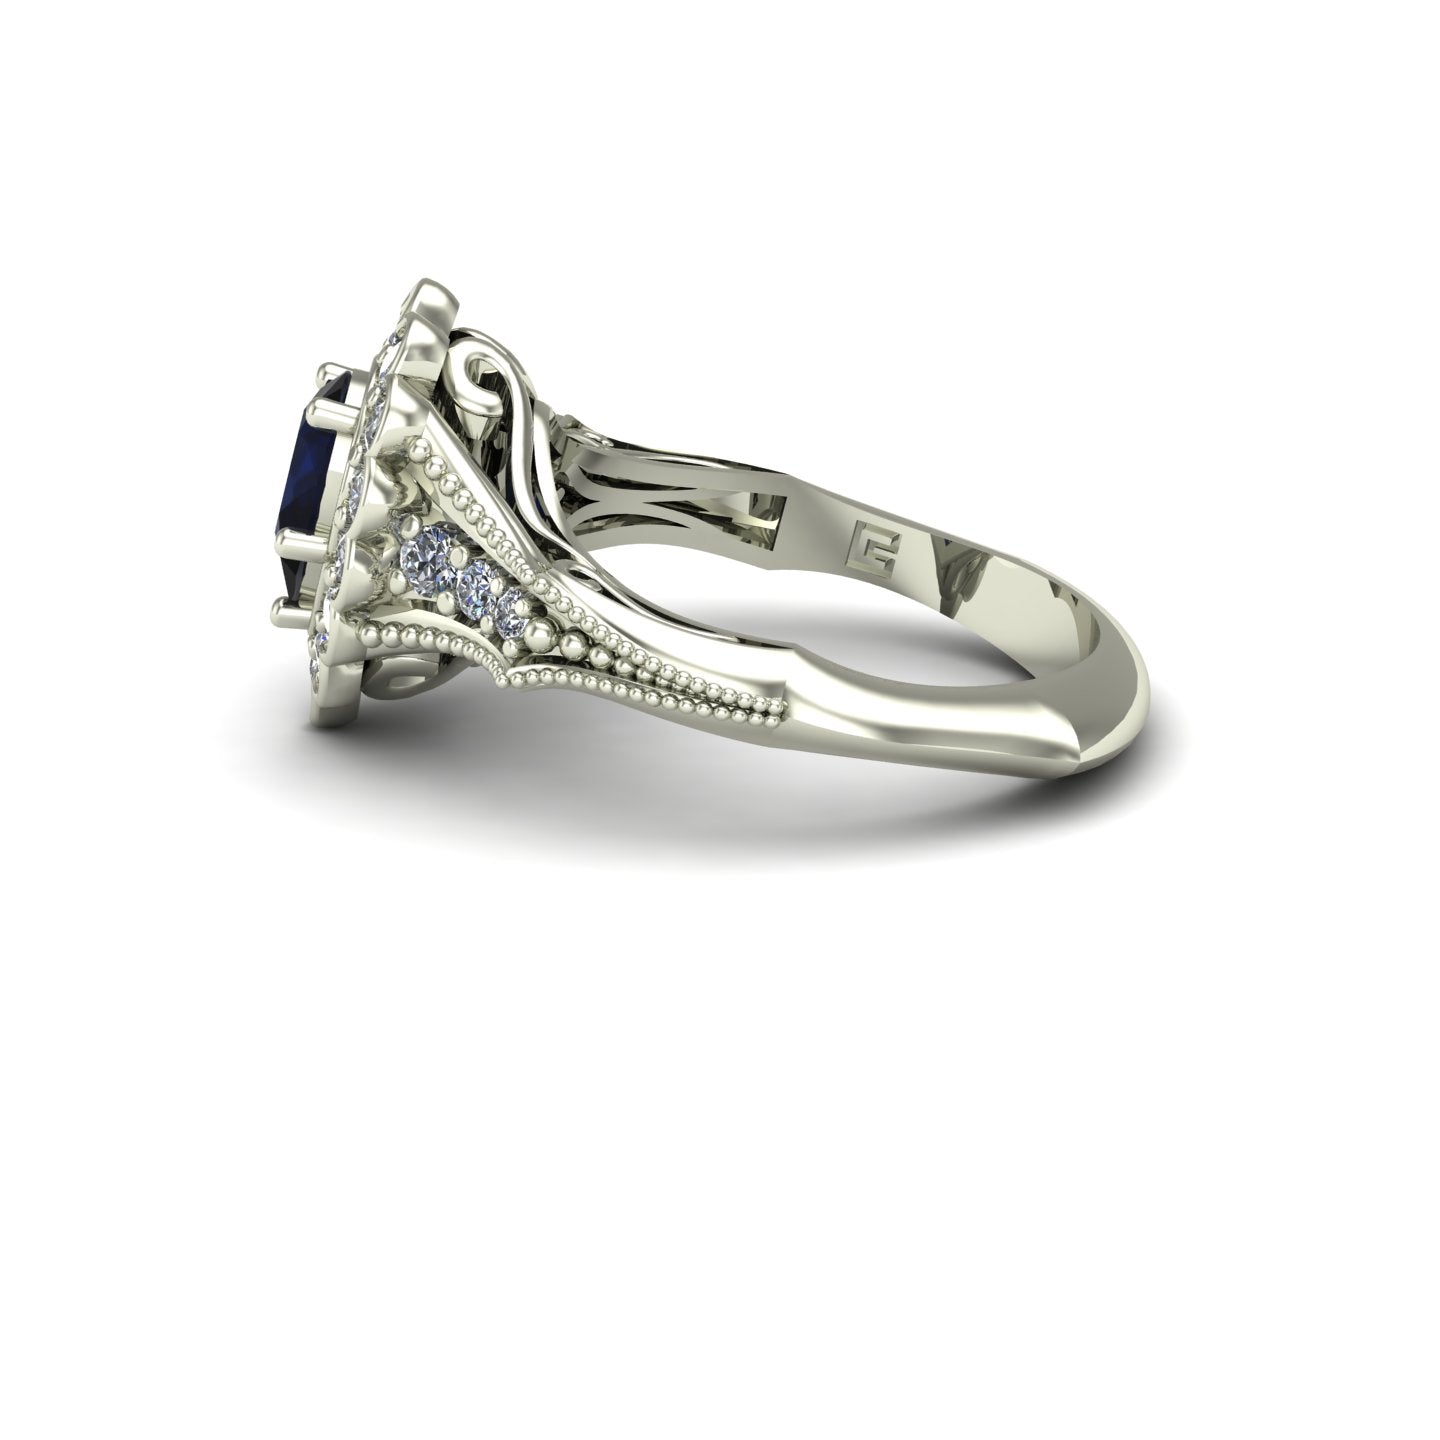 Pear blue sapphire and diamond vintage ring in 18k white gold - Charles Babb Designs - side view